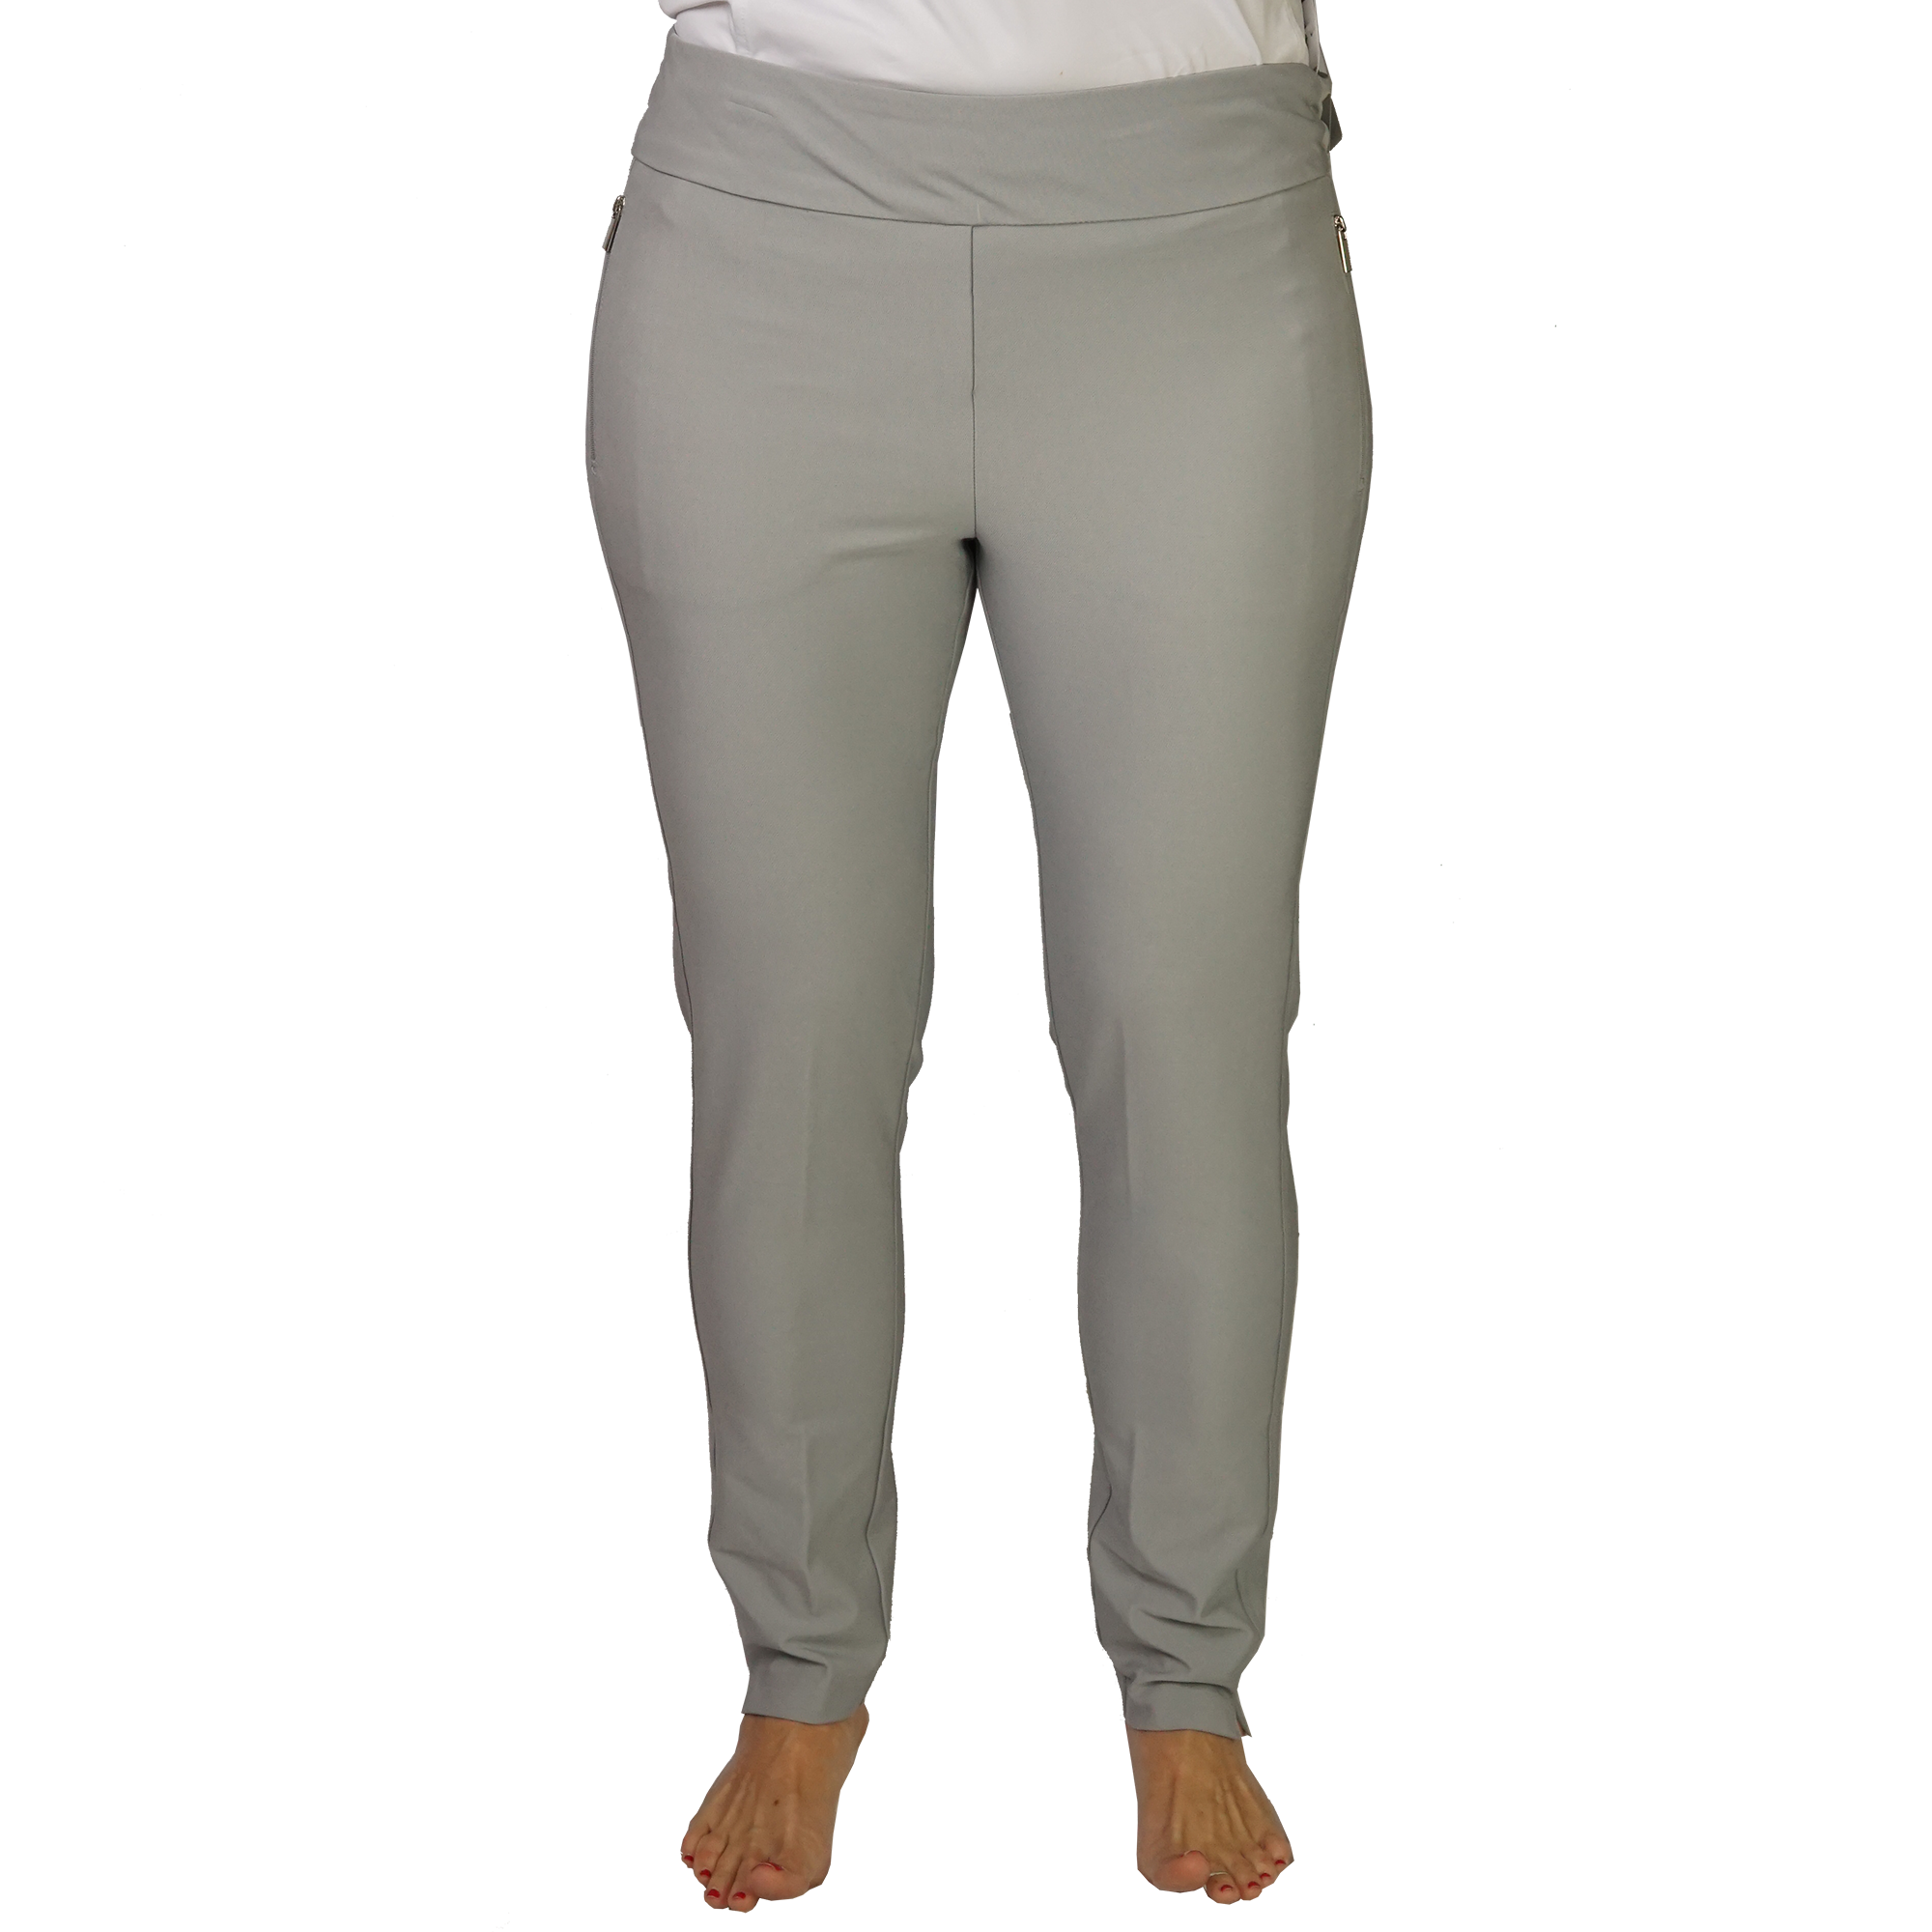 Track & Bliss Star Cut-Out Legging Grey SP1705 - Free Shipping at Largo  Drive